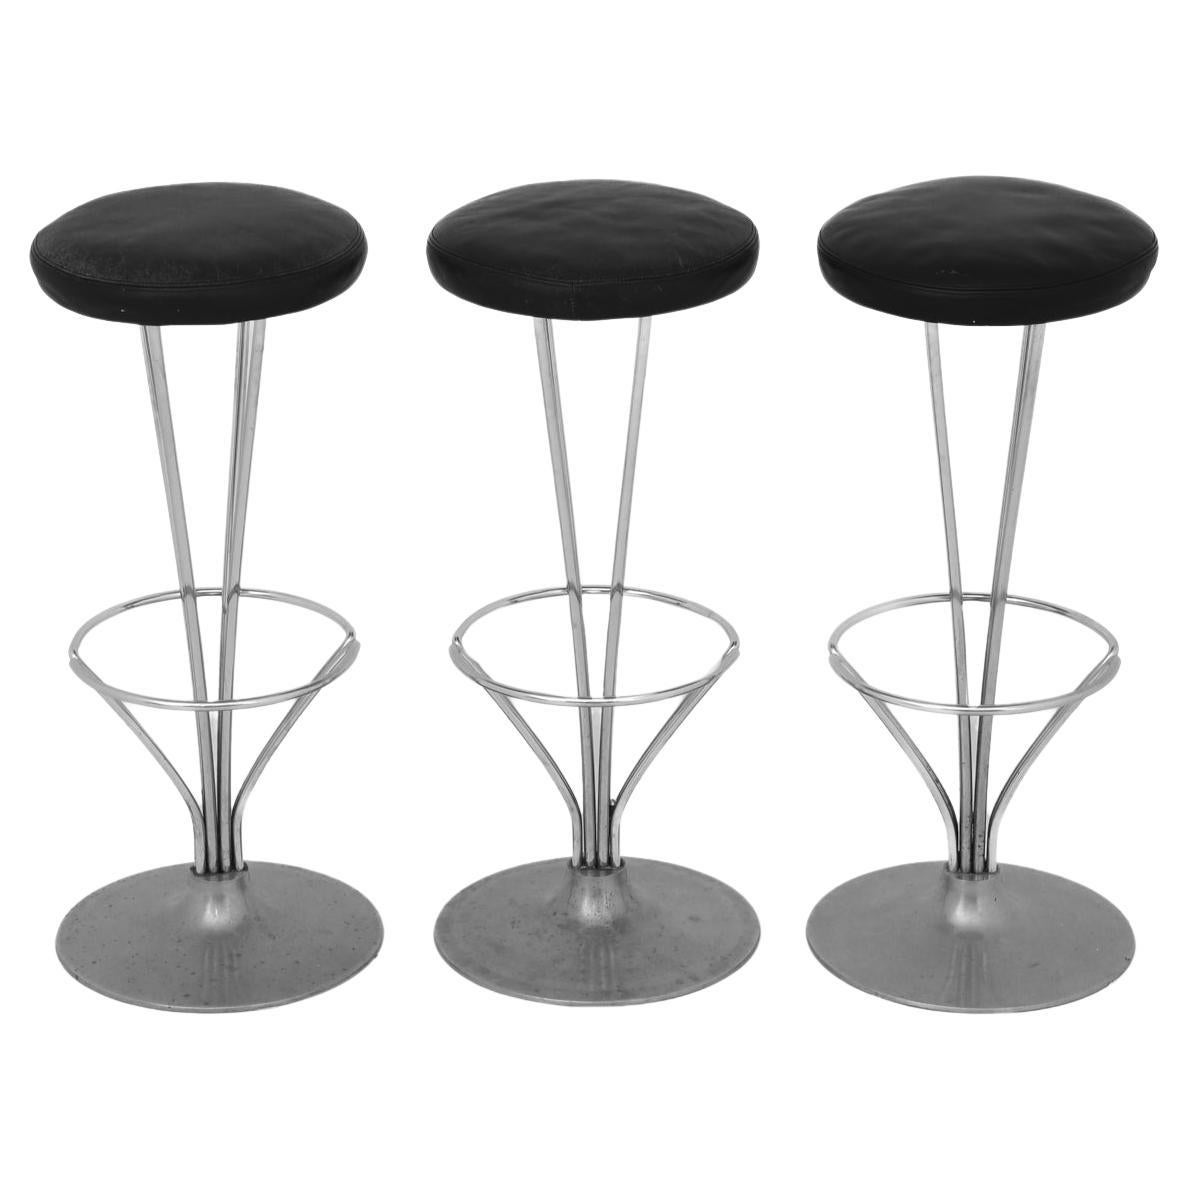 Set of 3 Bar Stools by Piet Hein